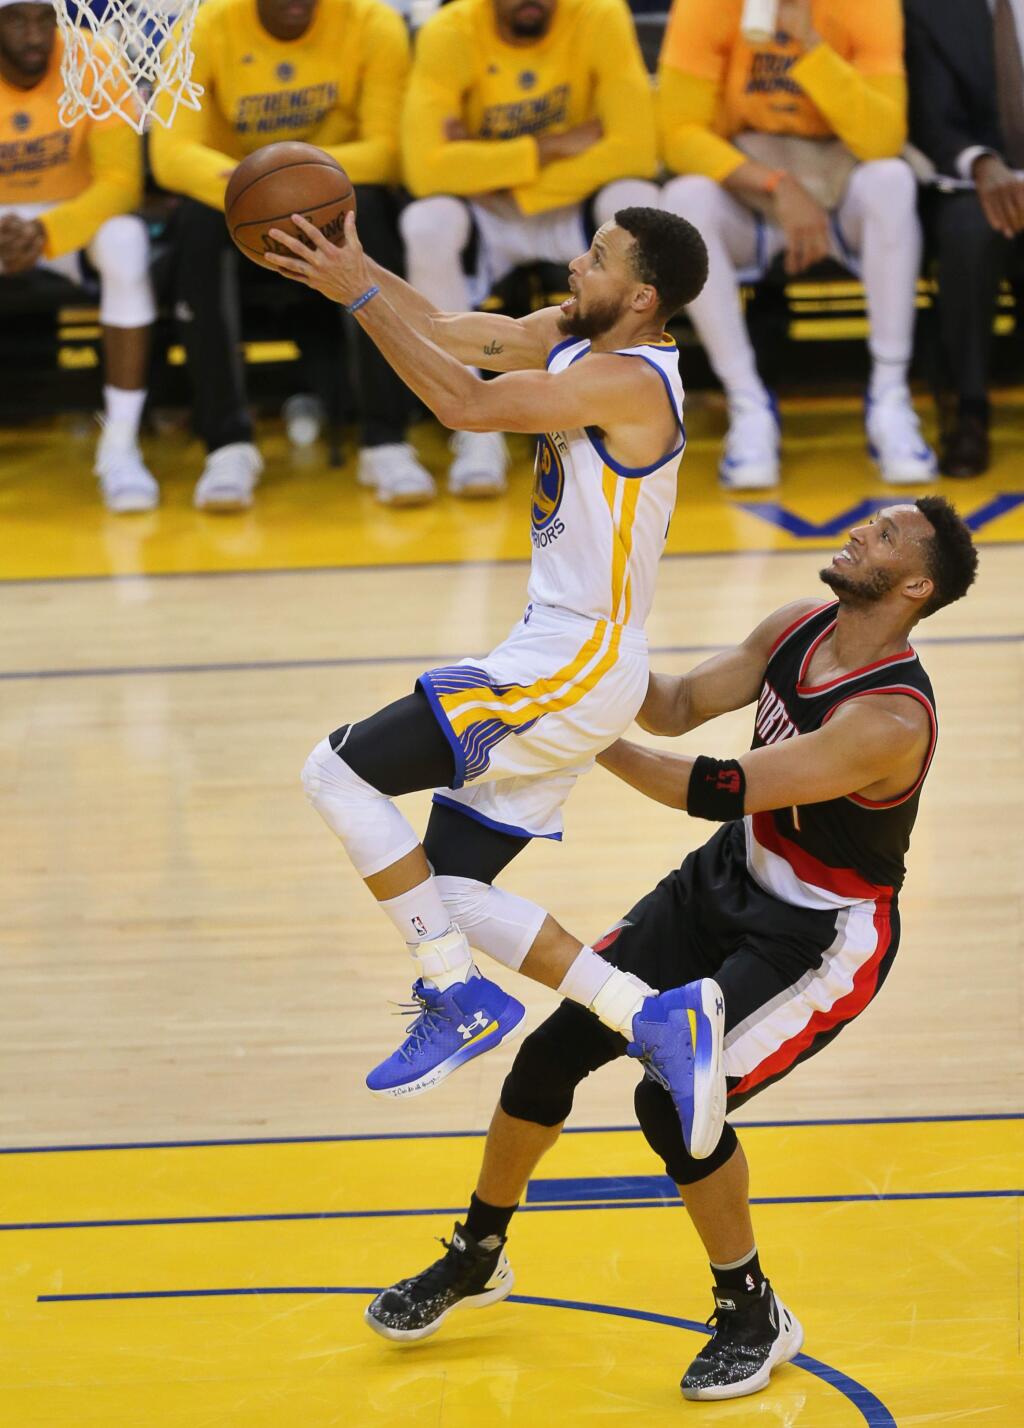 Golden State Warriors guard Stephen Curry goes up for a layup against Portland Trailblazers guard Evan Turner during Game 2 of the first round of NBA playoffs in Oakland on Wednesday, April 19, 2017. (Christopher Chung/ The Press Democrat)